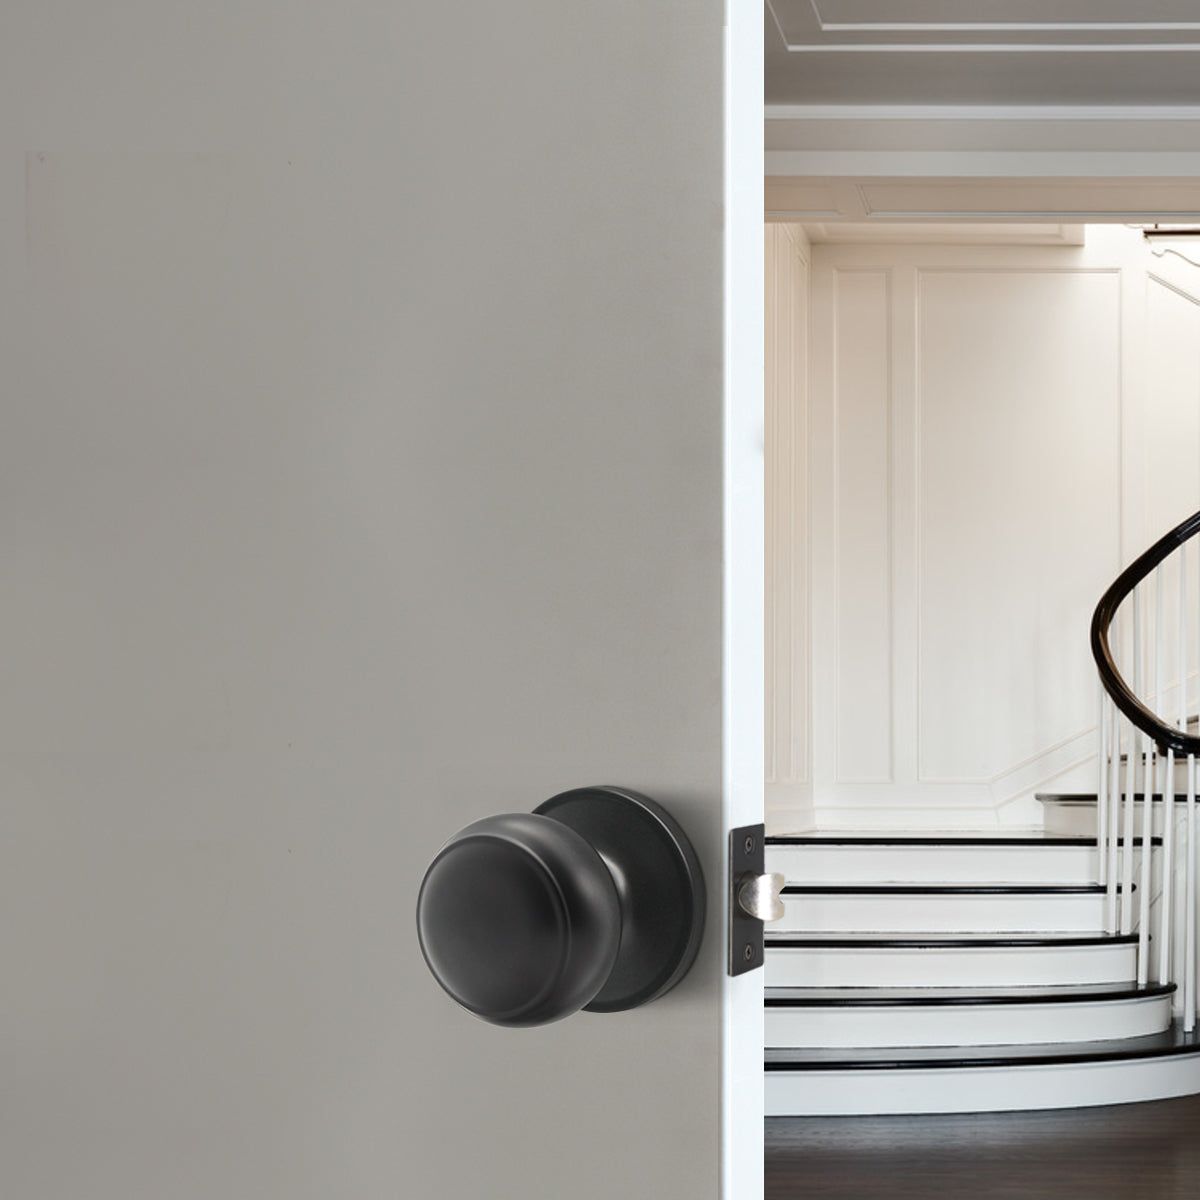 Flat Ball Passage Door Knobs for Closet and Hallway, Black Finish DL609BKPS